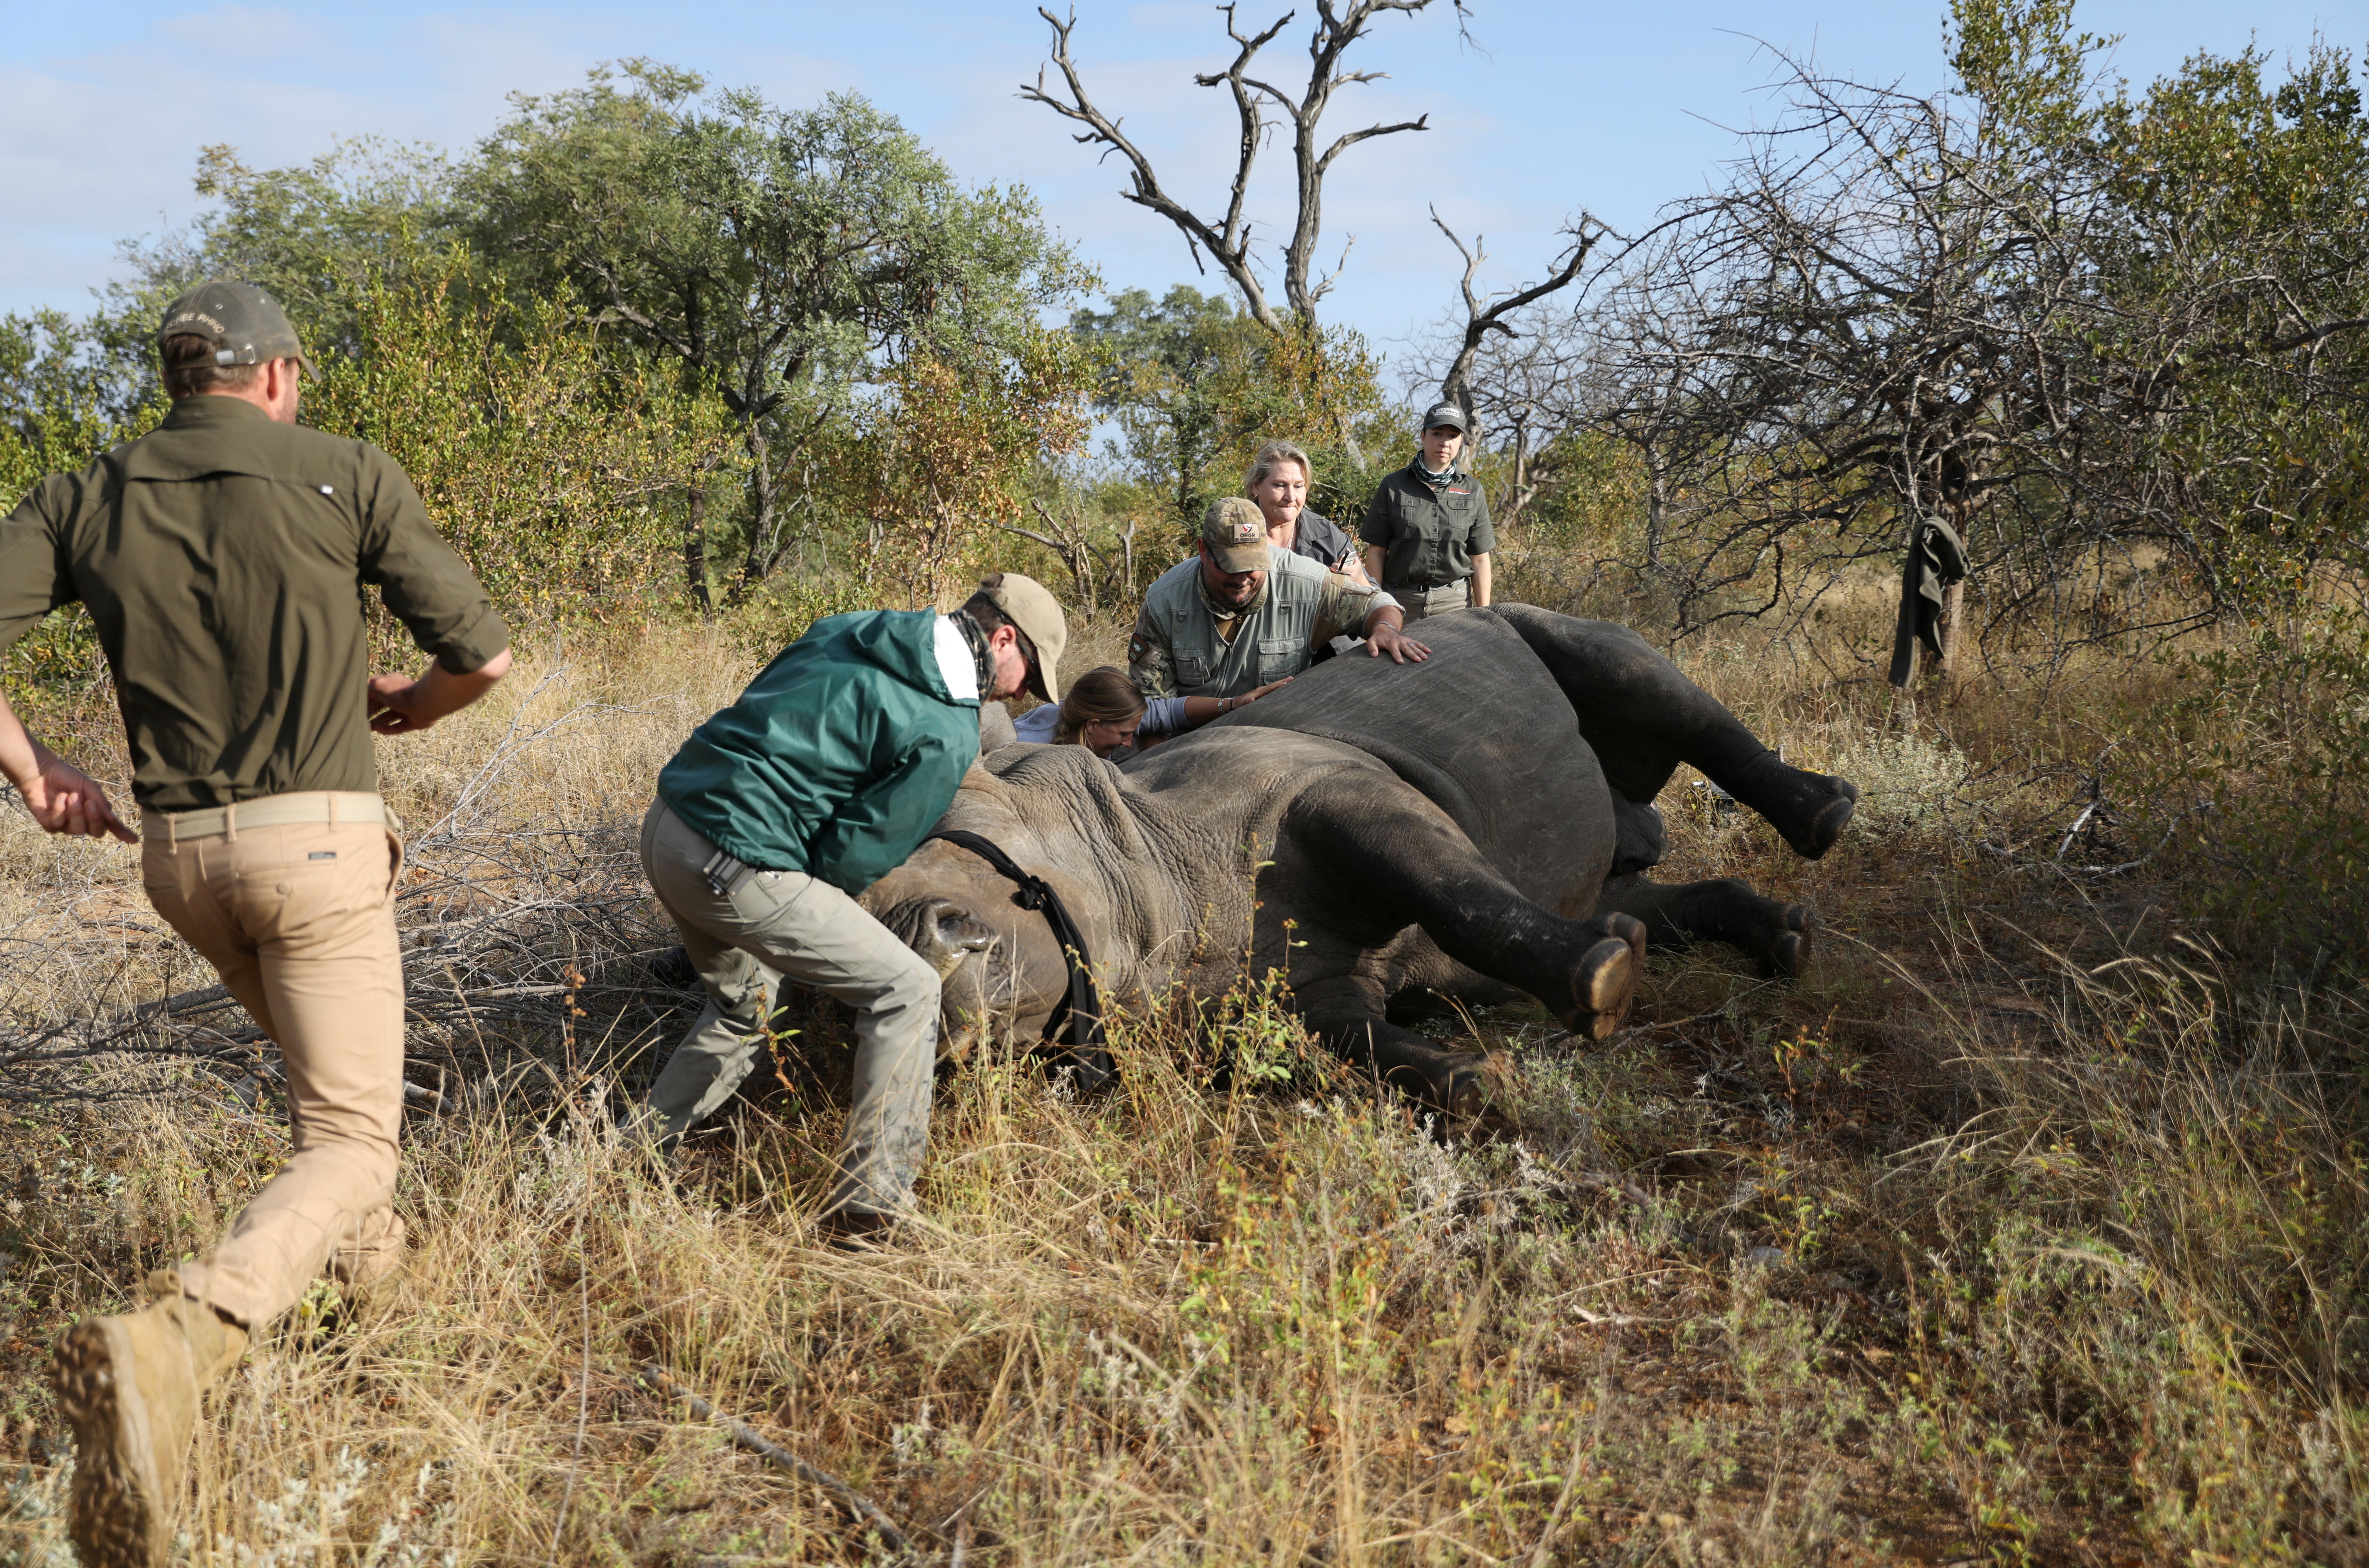 Fears mount of rebound in rhino poaching as COVID-19 travel restrictions ease